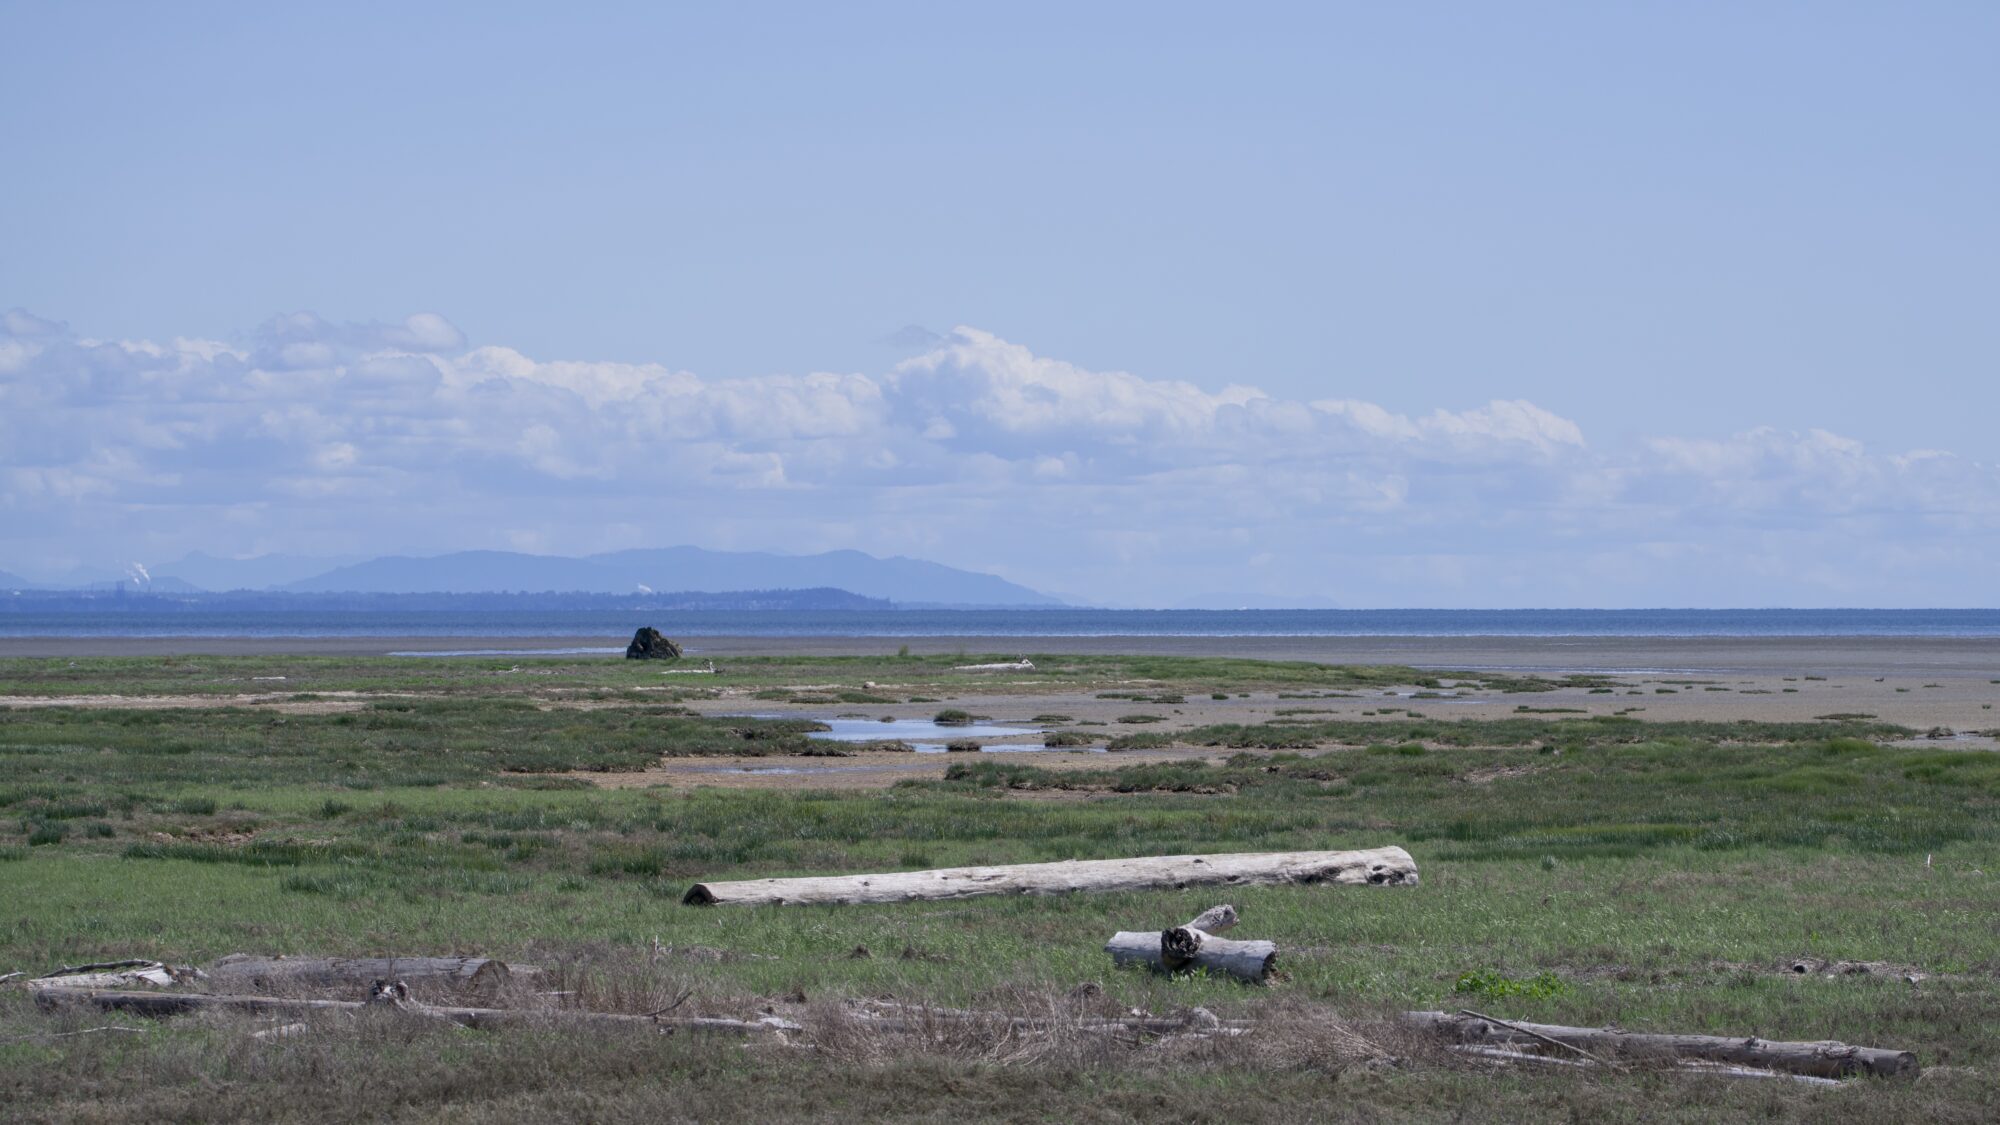 View from the Boundary Bay trail. Grassy, marshy land, and water way in the background. There are some low clouds in the sky